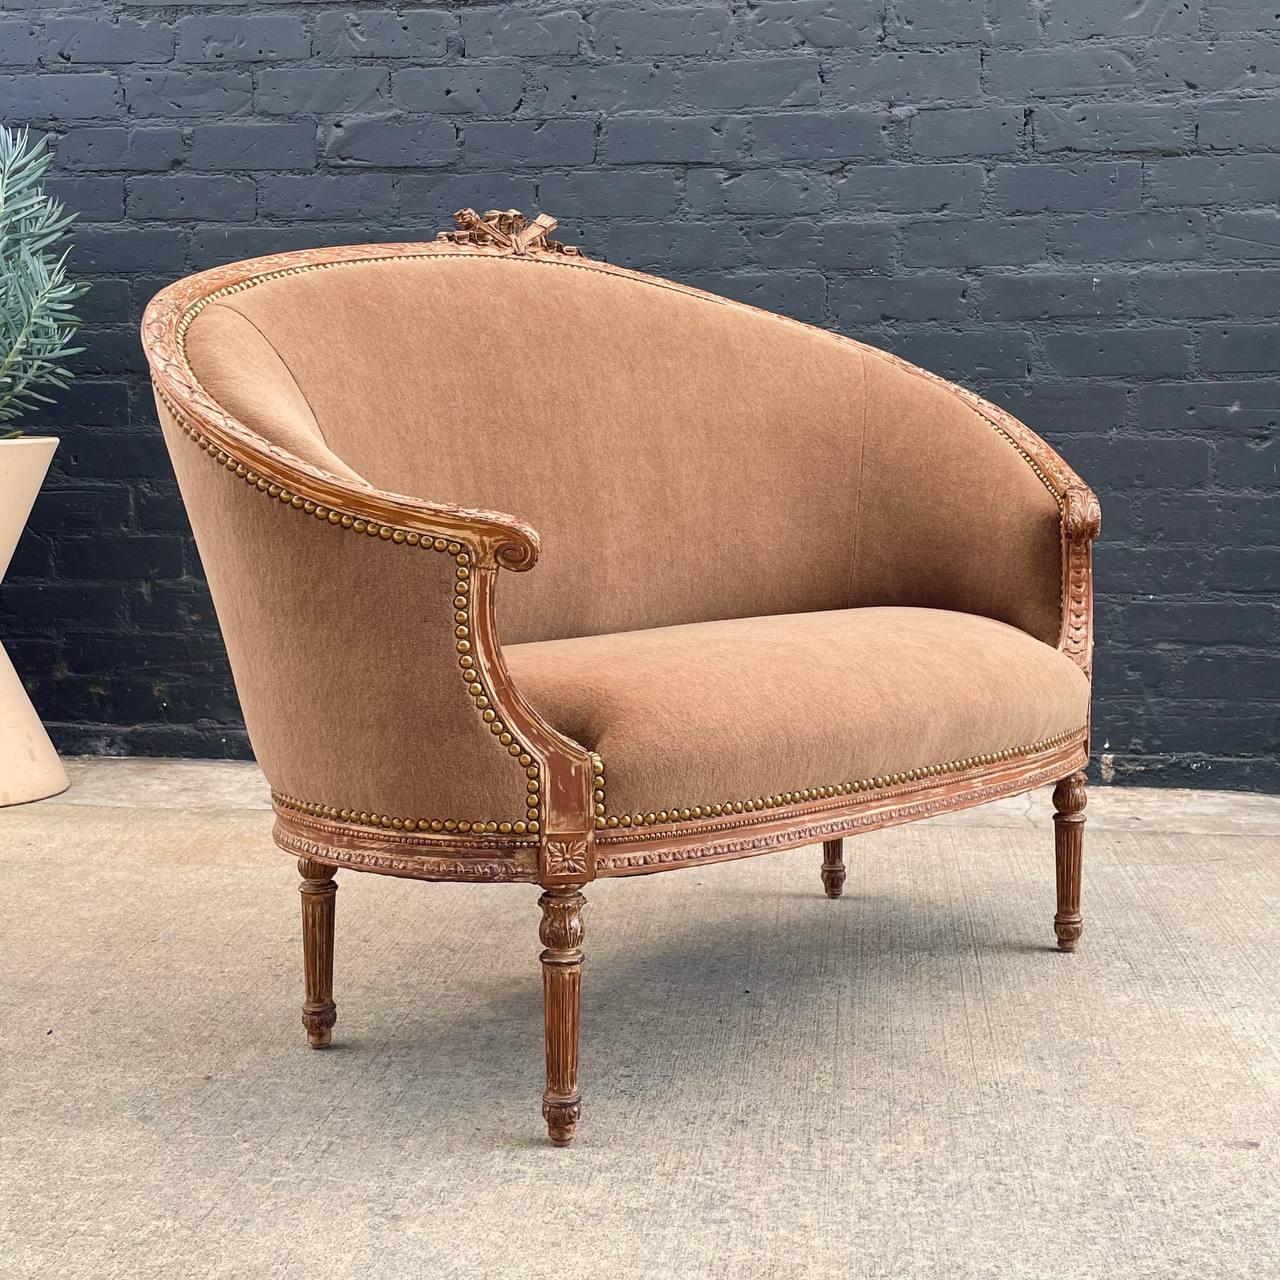 Antique French Louis XVI Alpaca Mohair Love Seat Sofa with Carved Details

Country: France
Materials: Carved Wood, Alpaca Mohair 
Condition: Newly Reupholstered 
Style: French Louis XVI 
Year: 1920s

$4,895

Dimensions:
37.50”H x 53”W x